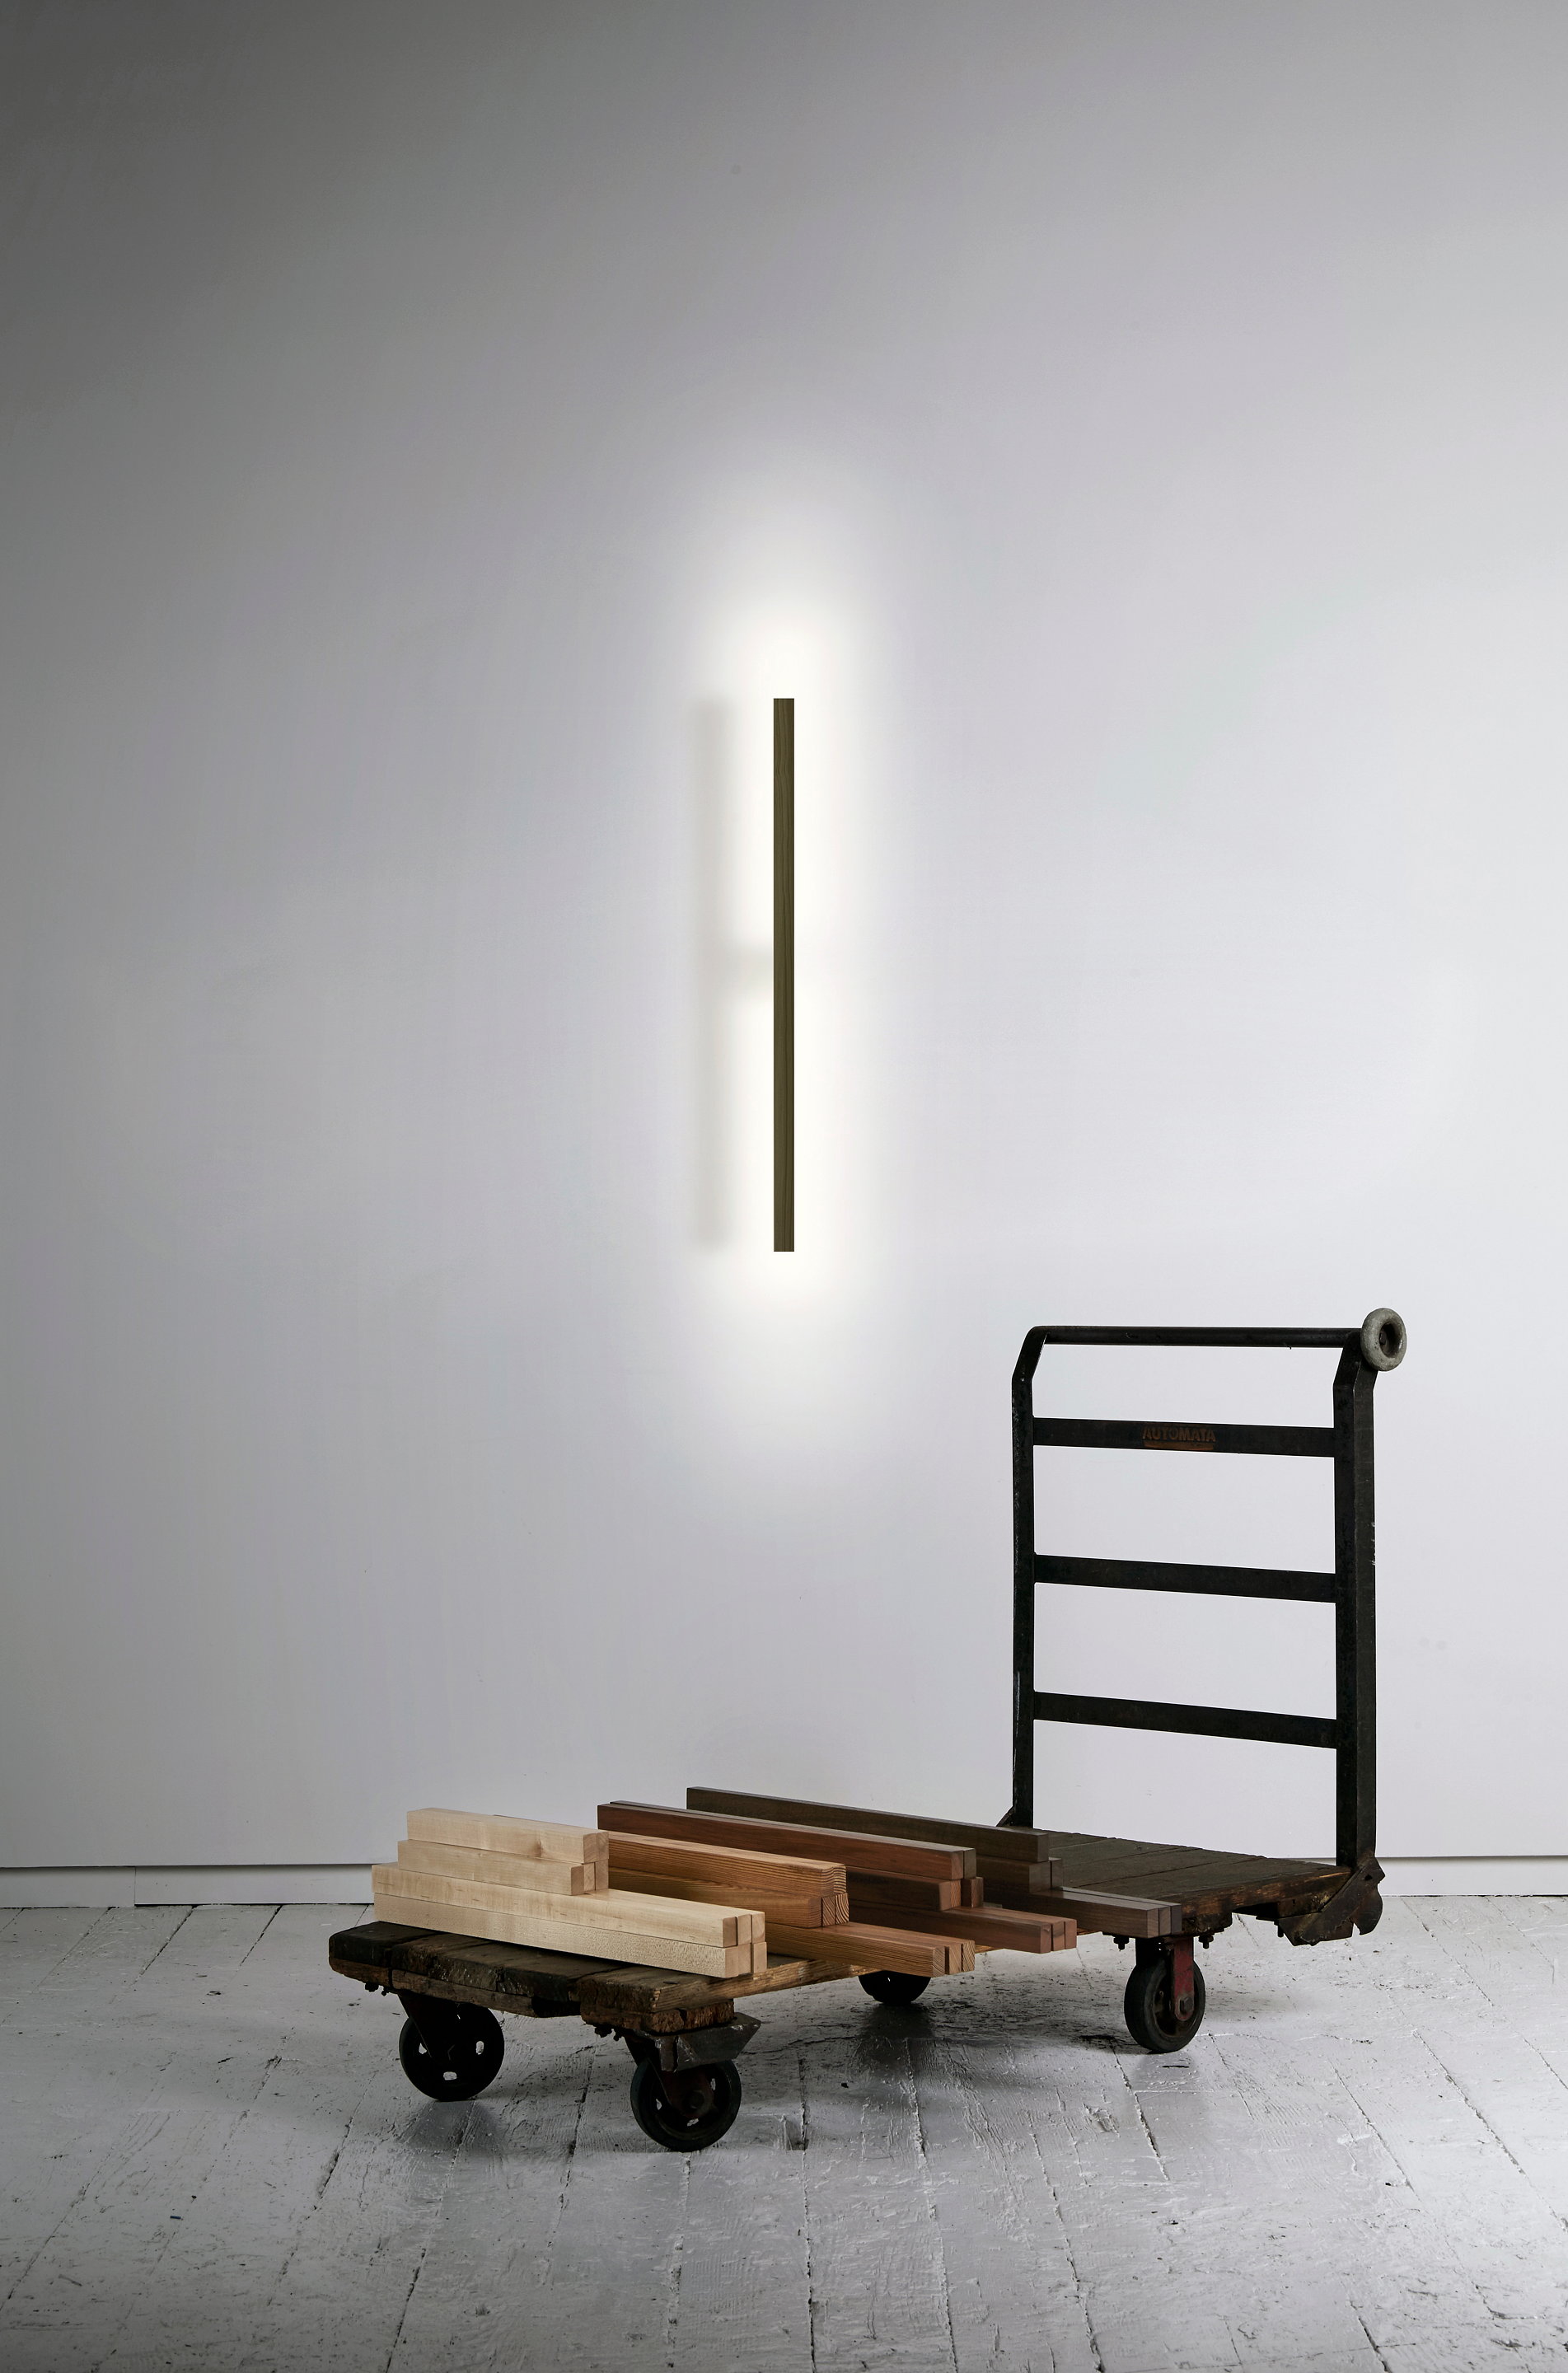  Stickbulb RAY Sconce »класс = "aimg laimg fimg lazyload" /> </source> </picture> </figure>
<figure class=